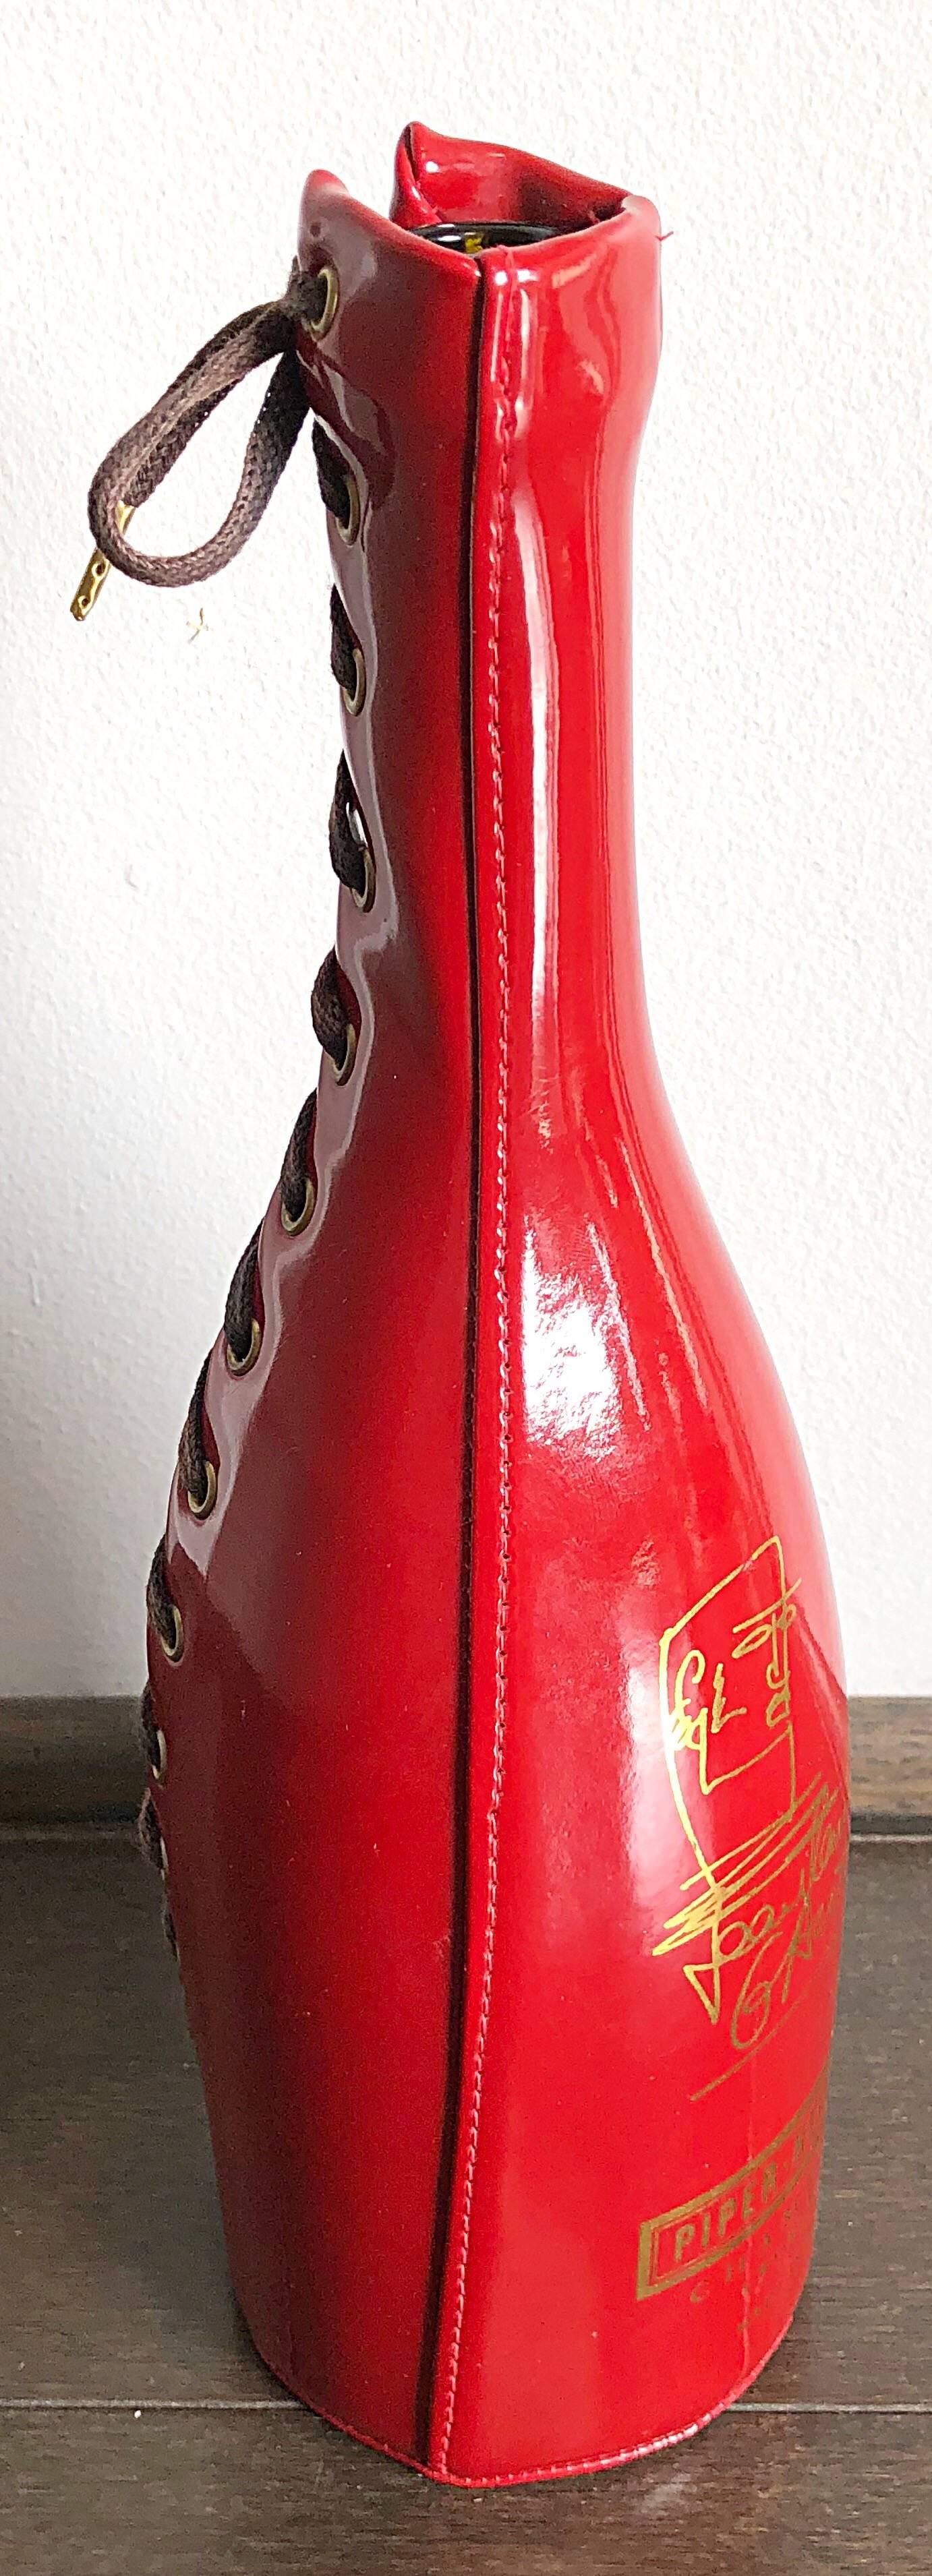 Rare late 90s JEAN PAUL GAULTIER for PIPER-HEIDSIECK red and gold vinyl corset champagne bottle, and holder. Limited edition series, that the designer created for the champagne brand in 1999. The perfect conversation piece for any interior designer.